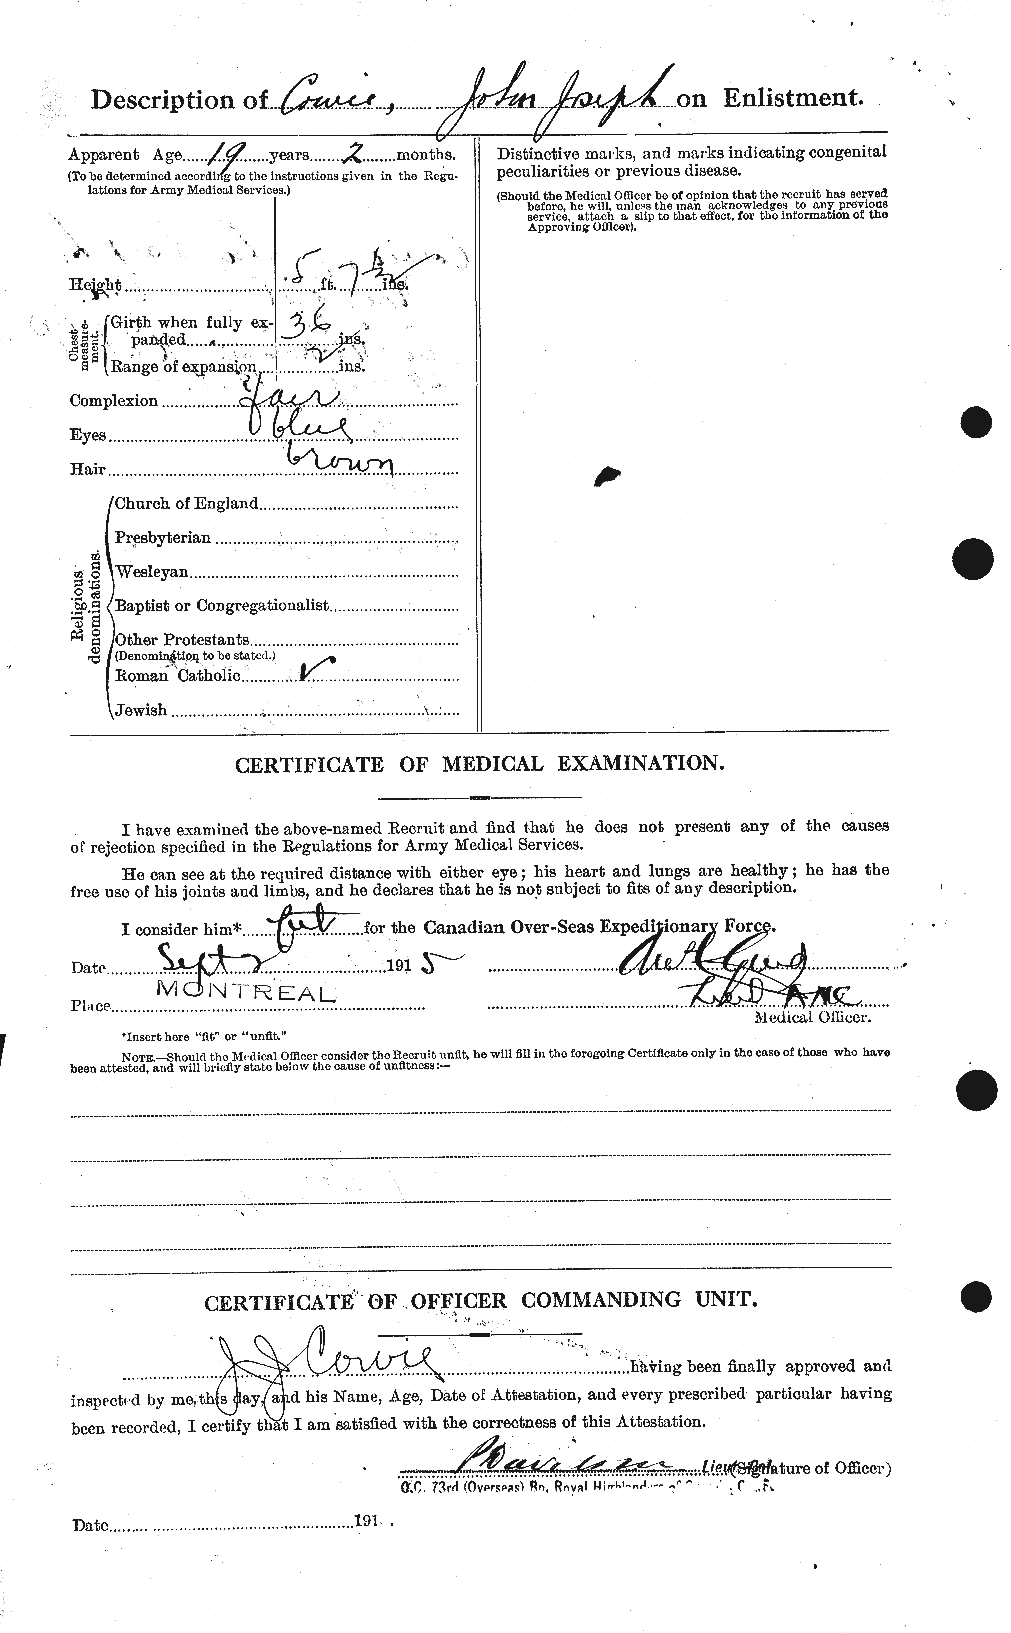 Personnel Records of the First World War - CEF 059999b